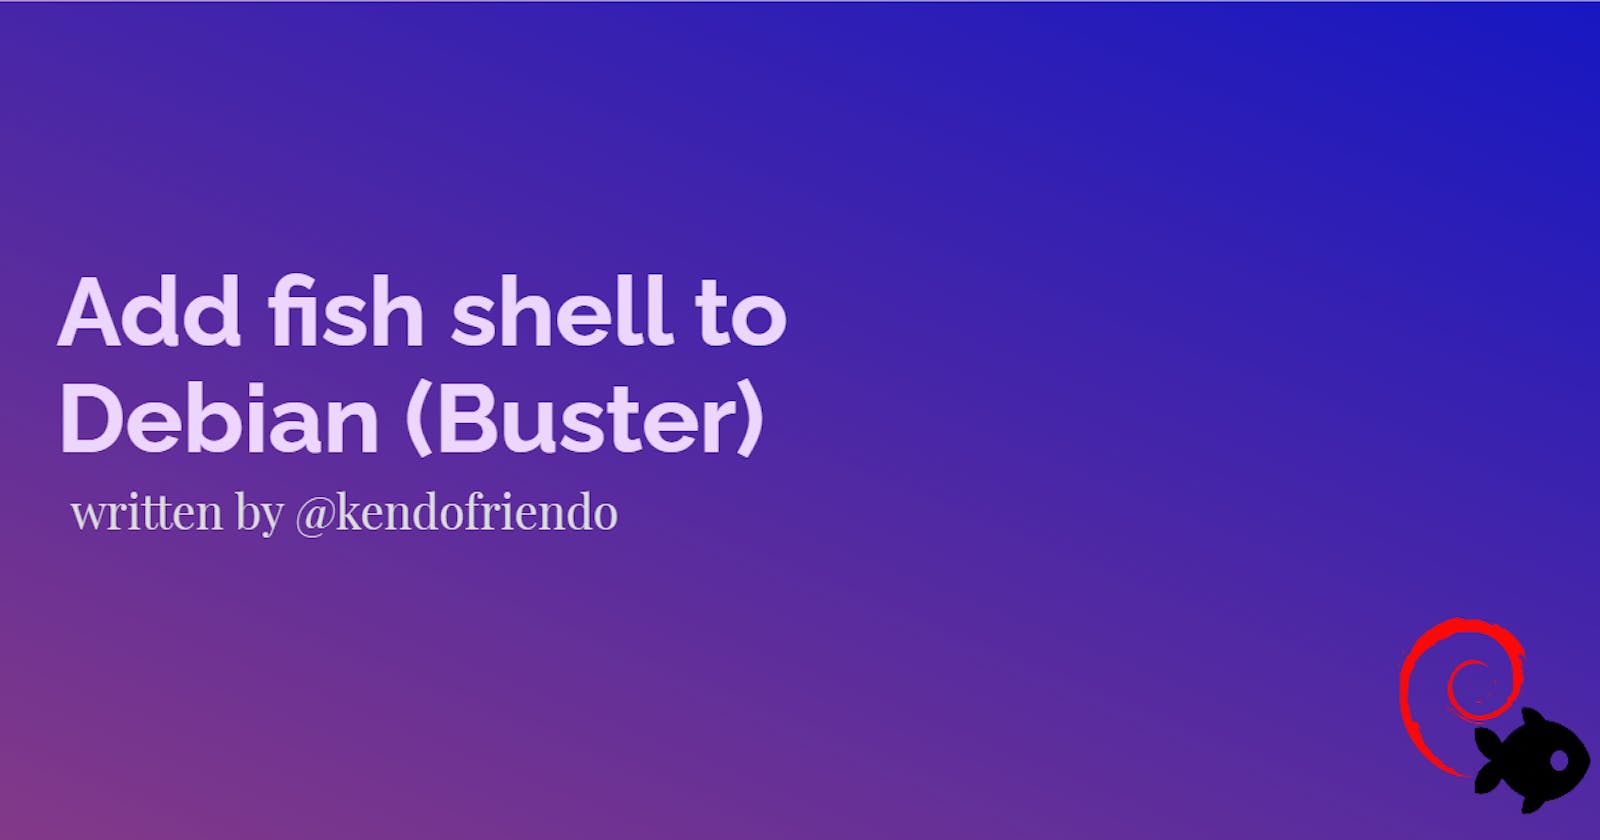 Add fish shell to Debian (Buster)